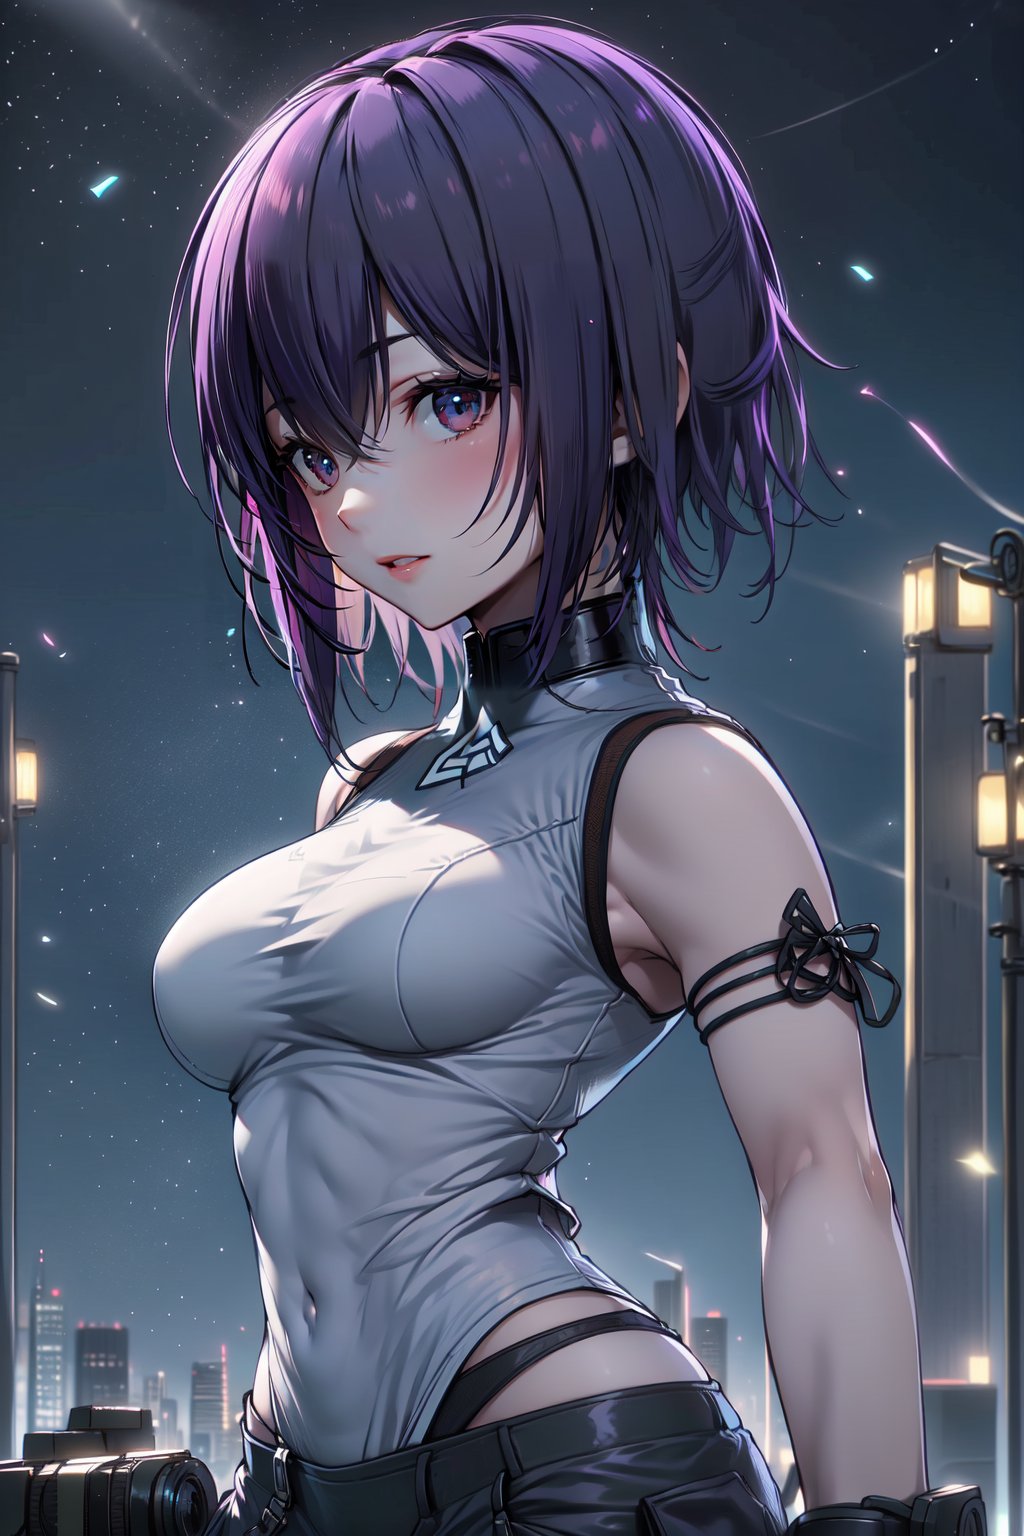 (1girl:1.5), Motoko Kusanagi, a stunning Japanese woman, weating tight white sleeveless shirt and short shorts, cute pose, from below side, stands confidently against a cityscape backdrop at night, The camera captures her elegant profile from a side angle, emphasizing her delicate features as she gazes off-camera. Her skin glows in the soft focus, radiating intimacy and subtlety. cameltoe,niji,GlowingRunes_,motoko2045wz